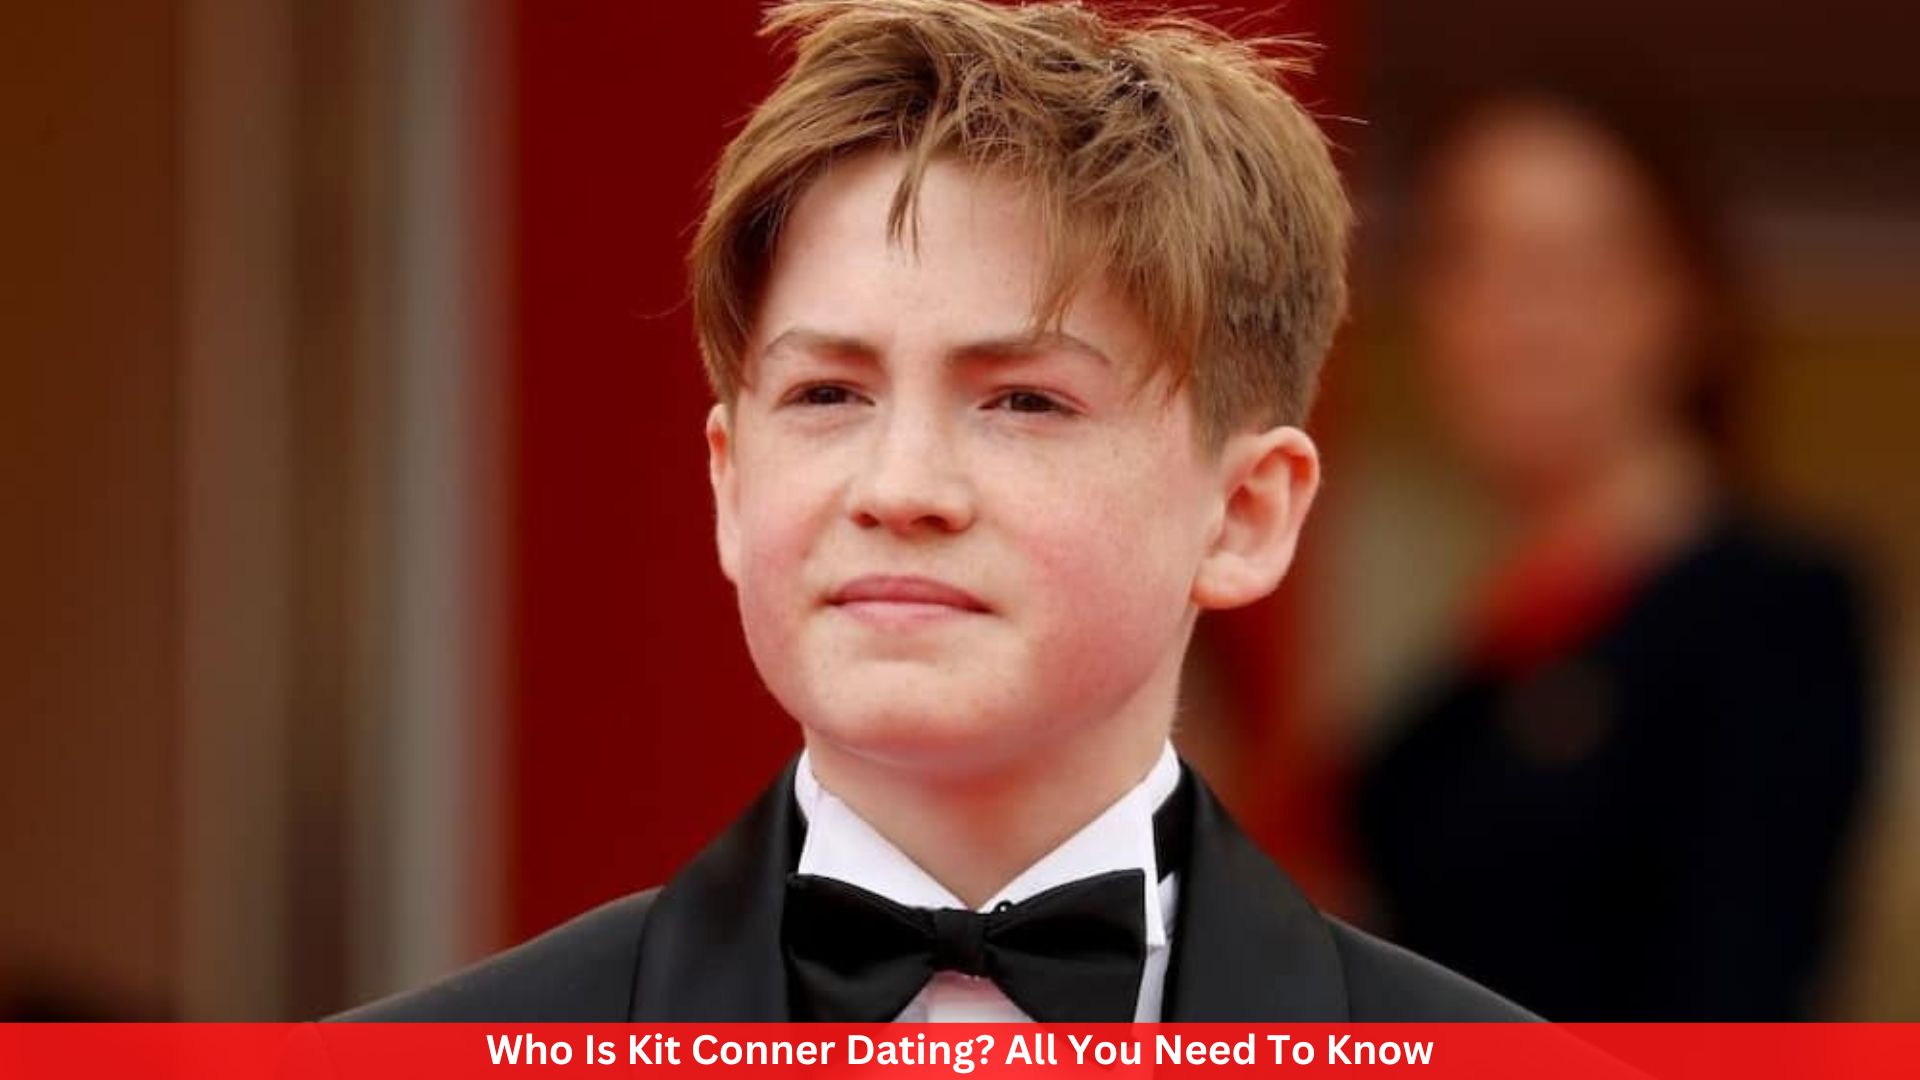 Who Is Kit Conner Dating? All You Need To Know